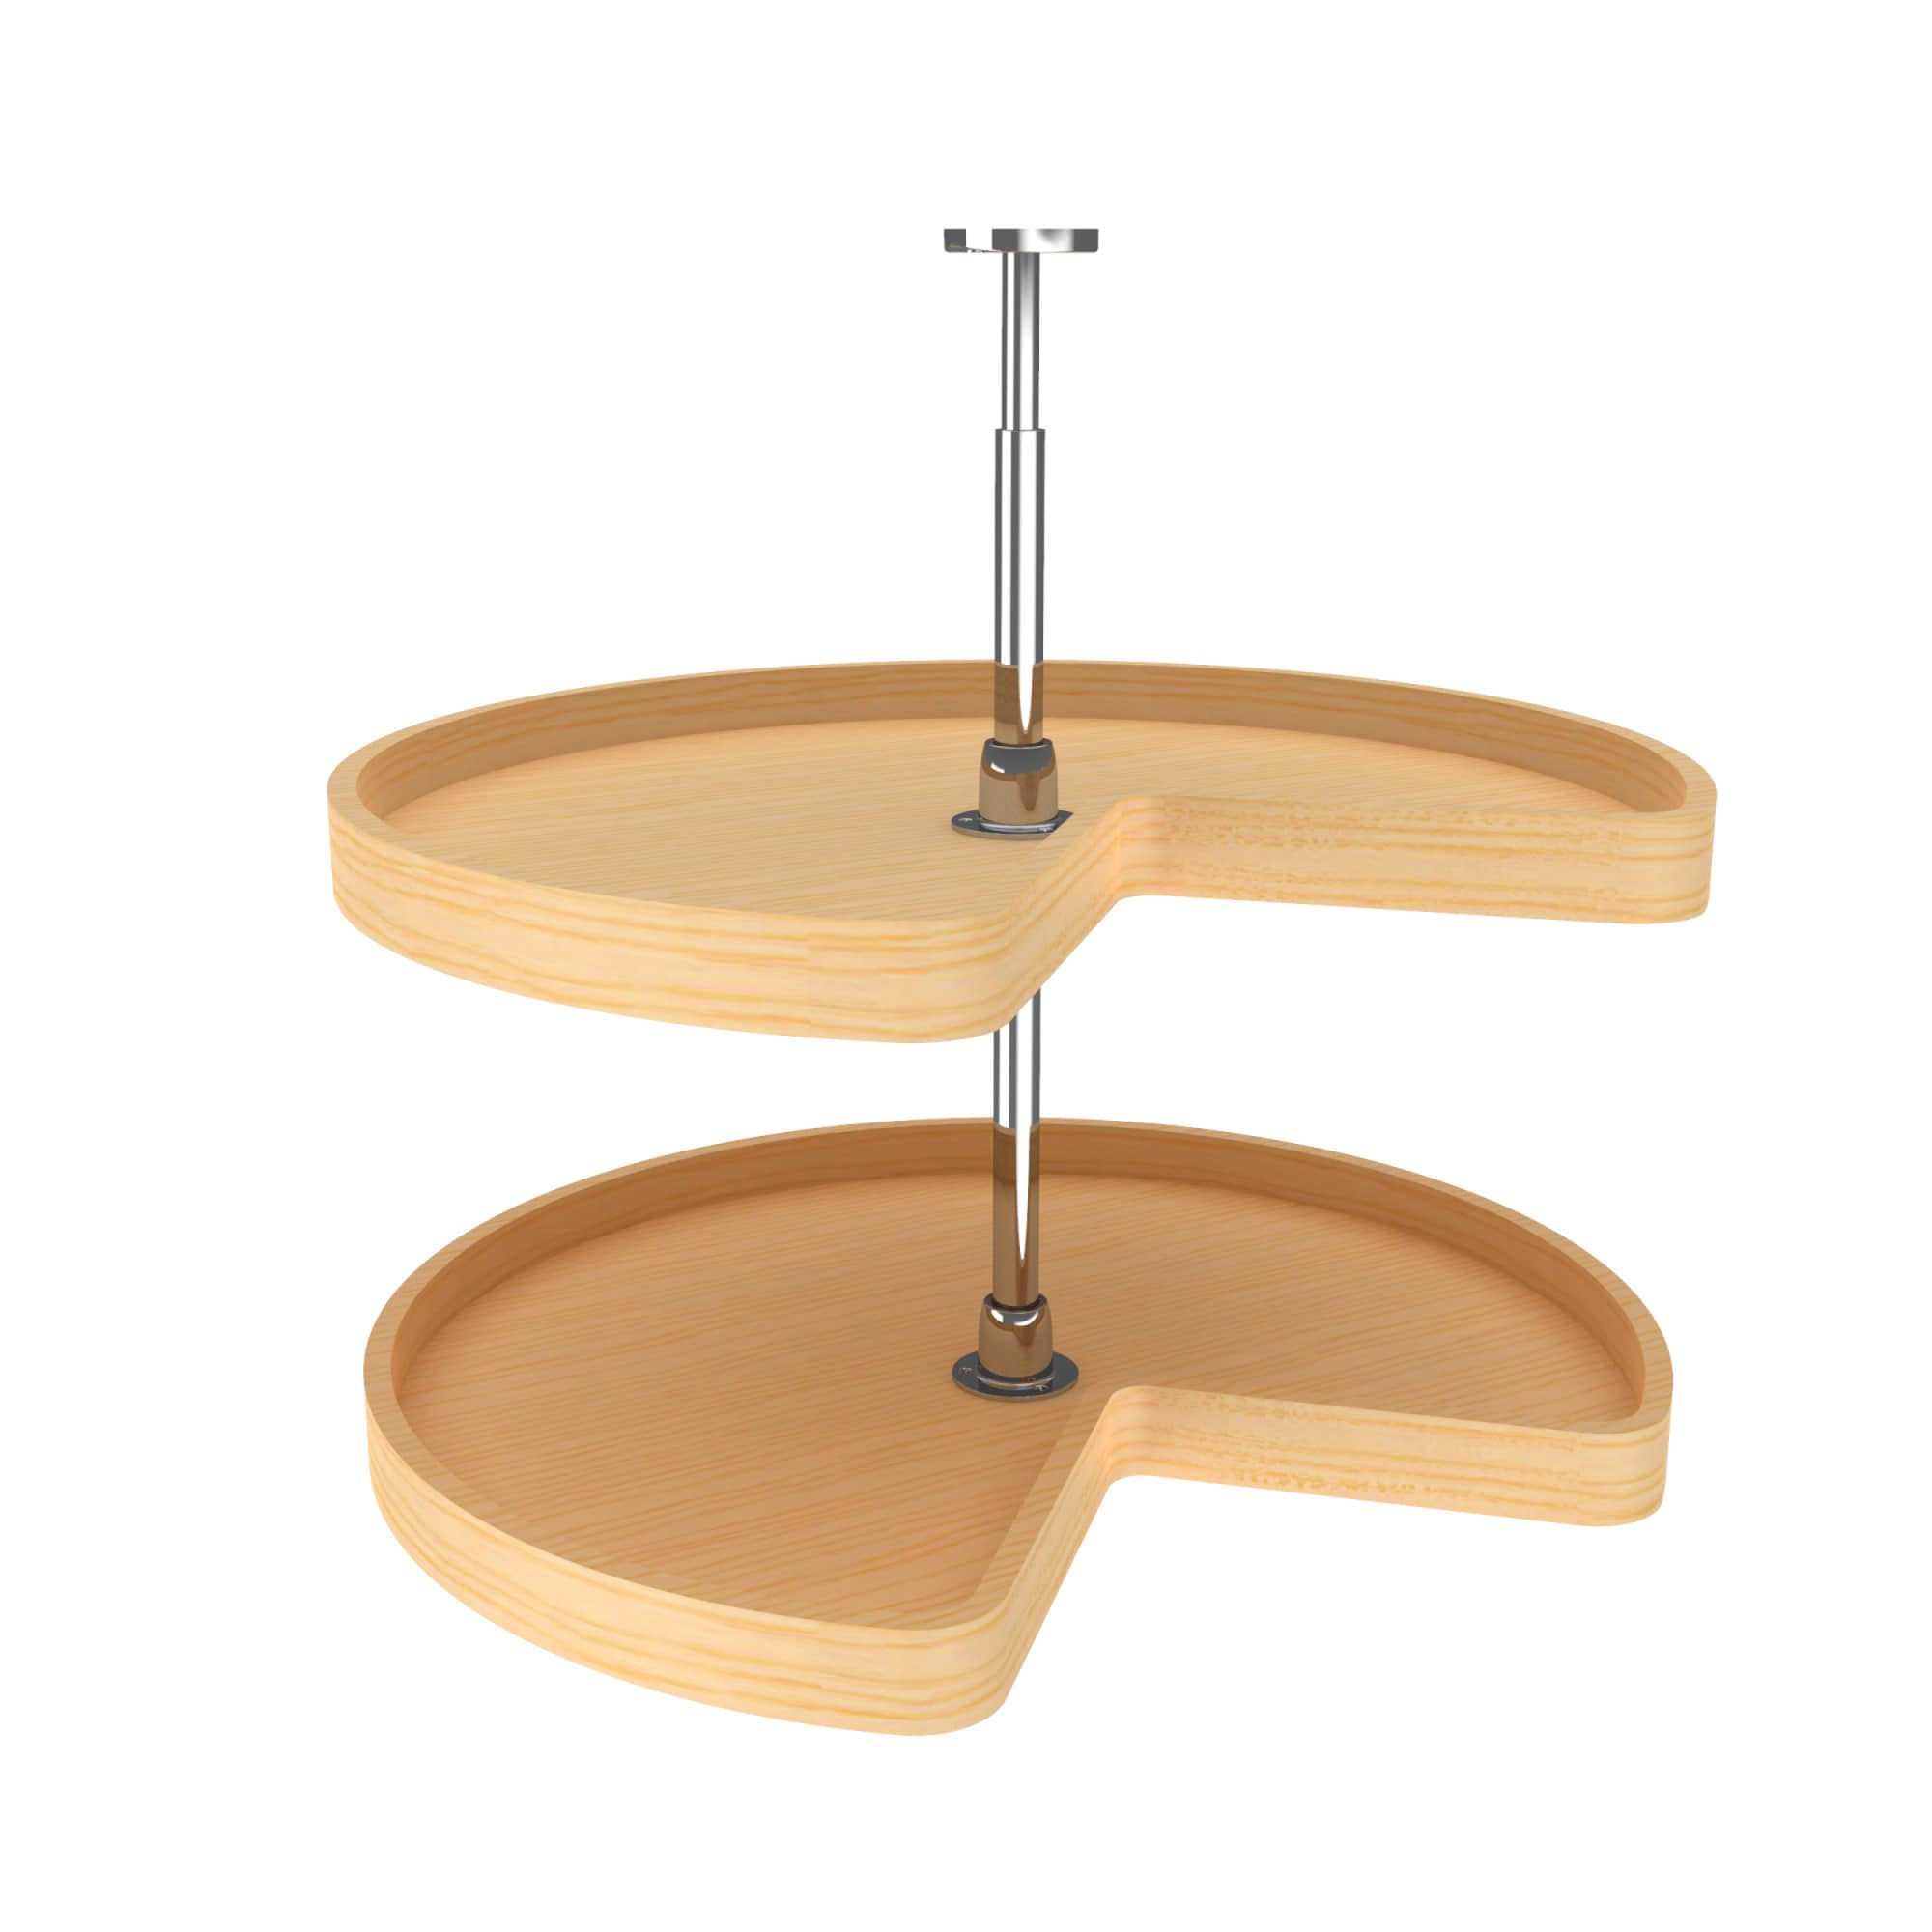 Counter Top 2-Tier Spinning Bowl Display with Adjustable Bowl Height, 35 inch H, 1 Unit